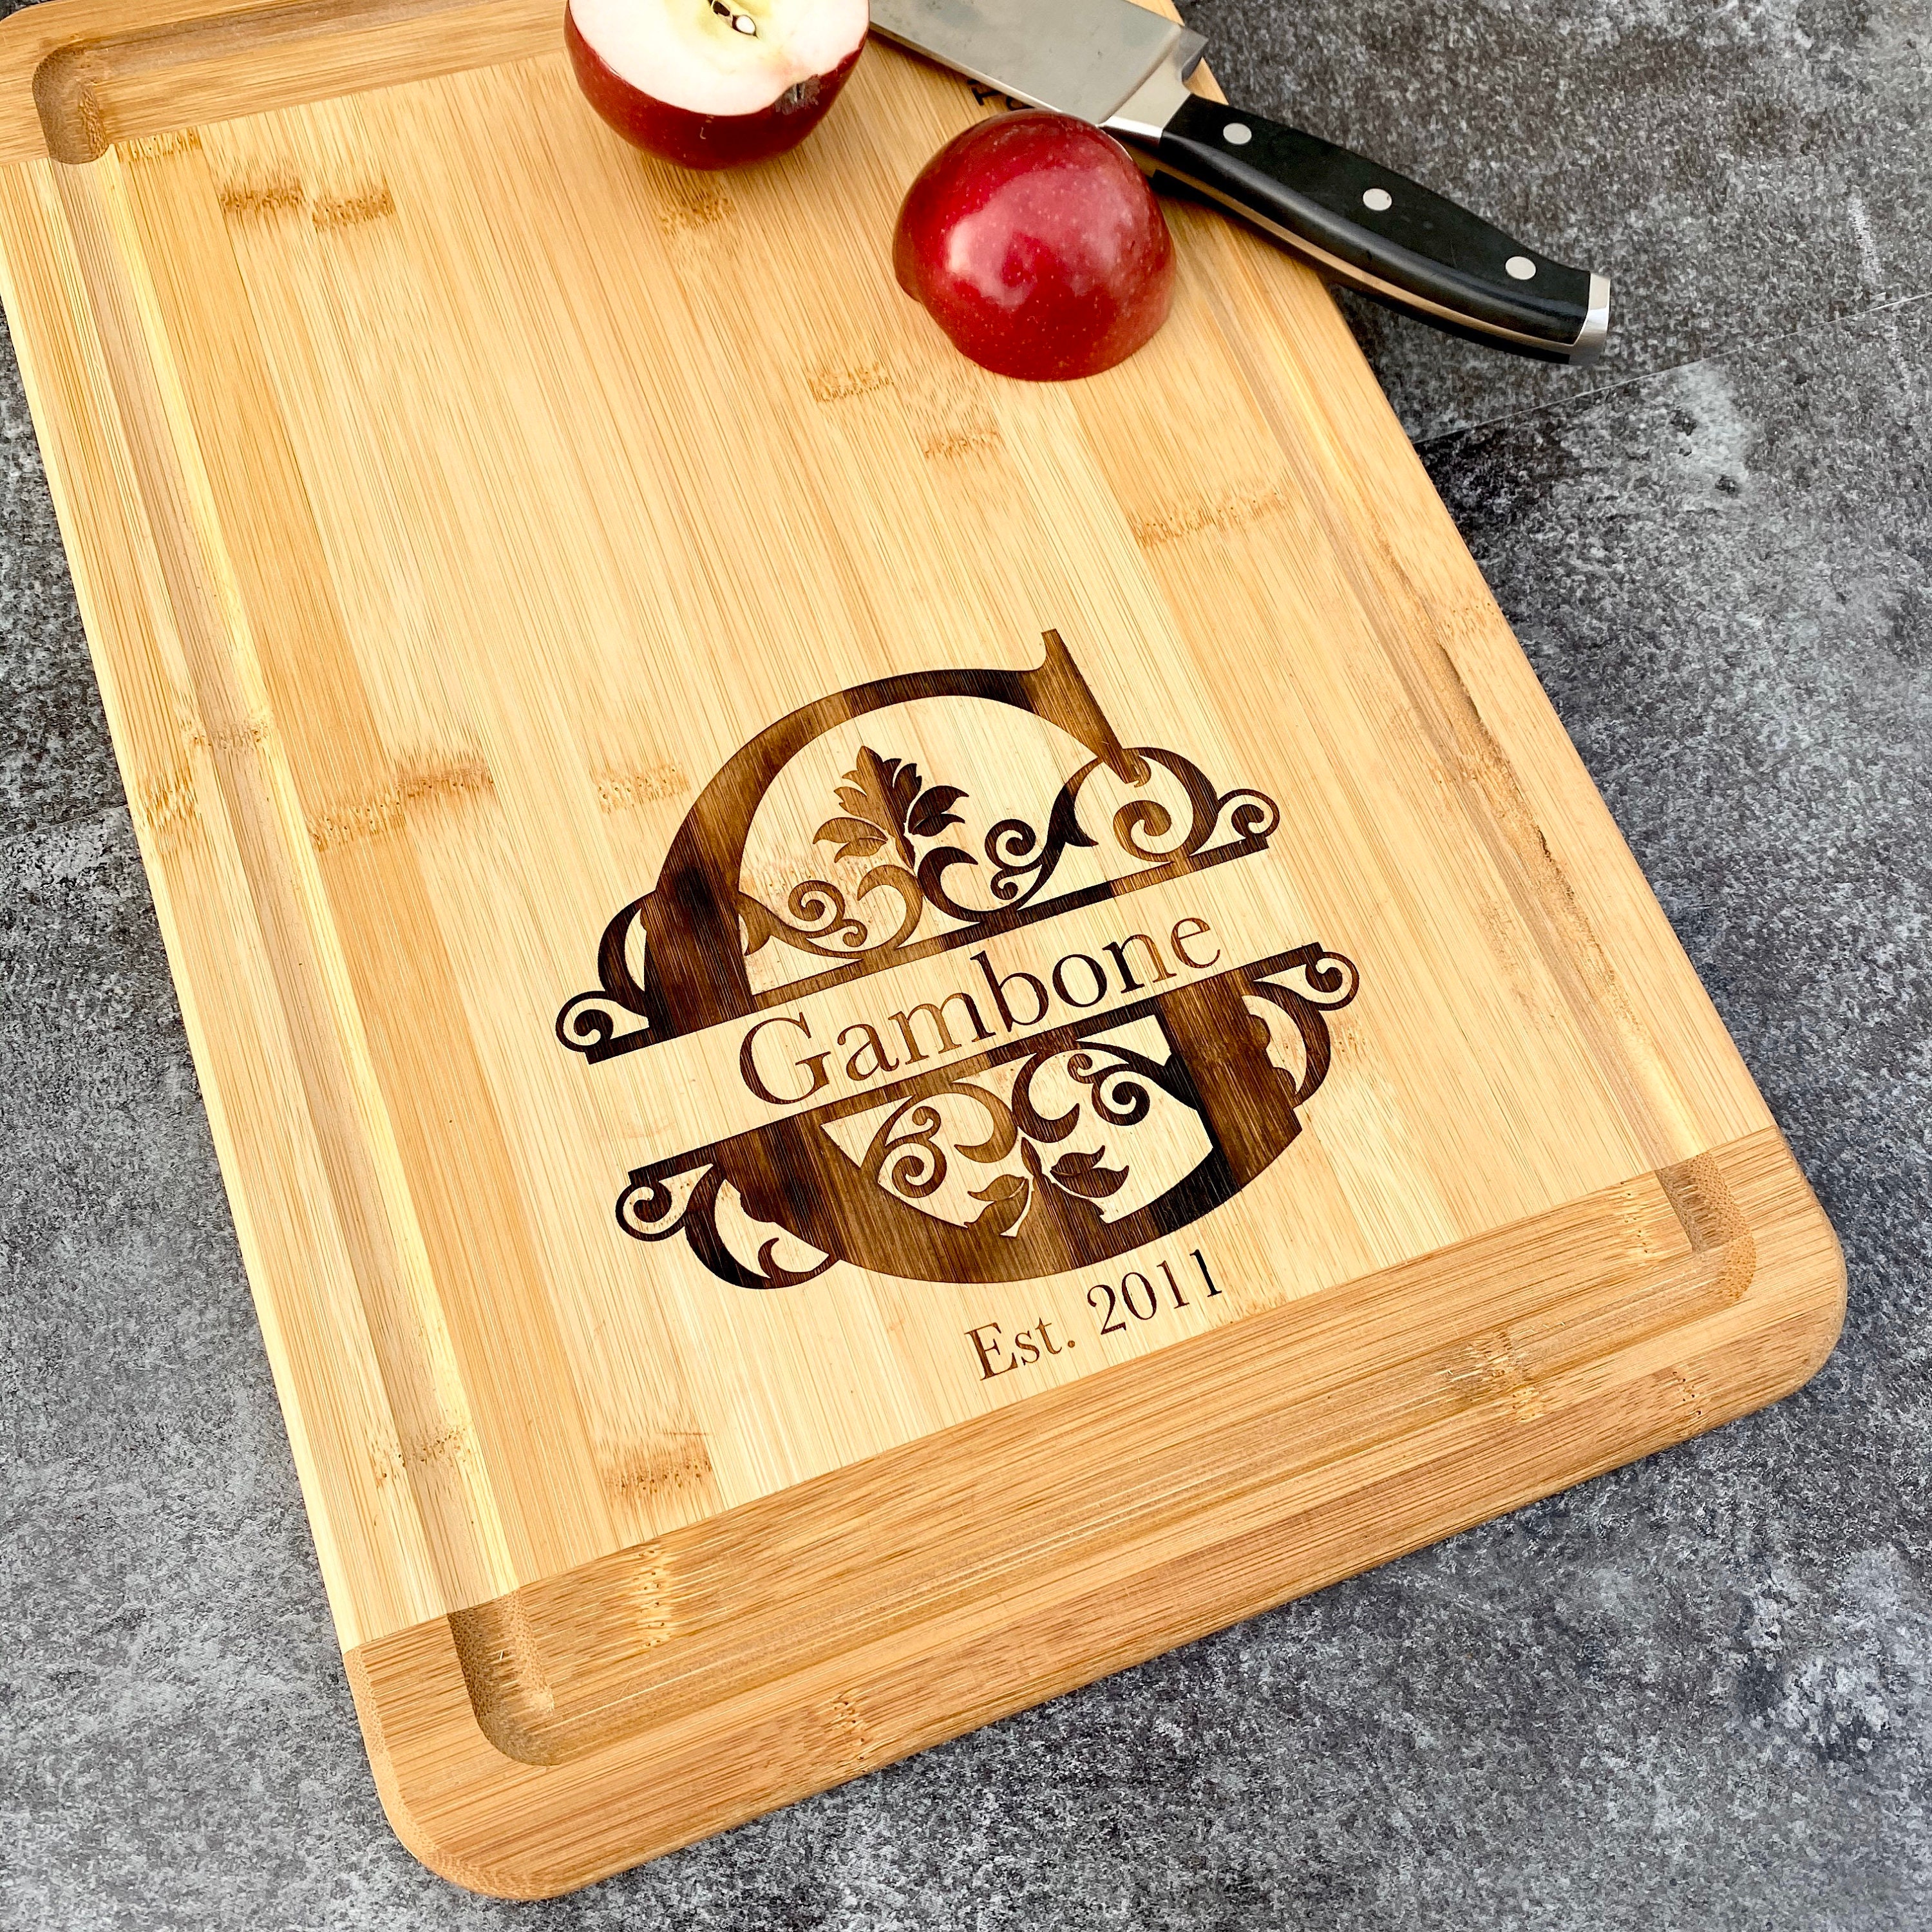 Wood Engraved Custom Cutting Board Anniversary Or Wedding Gift Personalized Cutting With